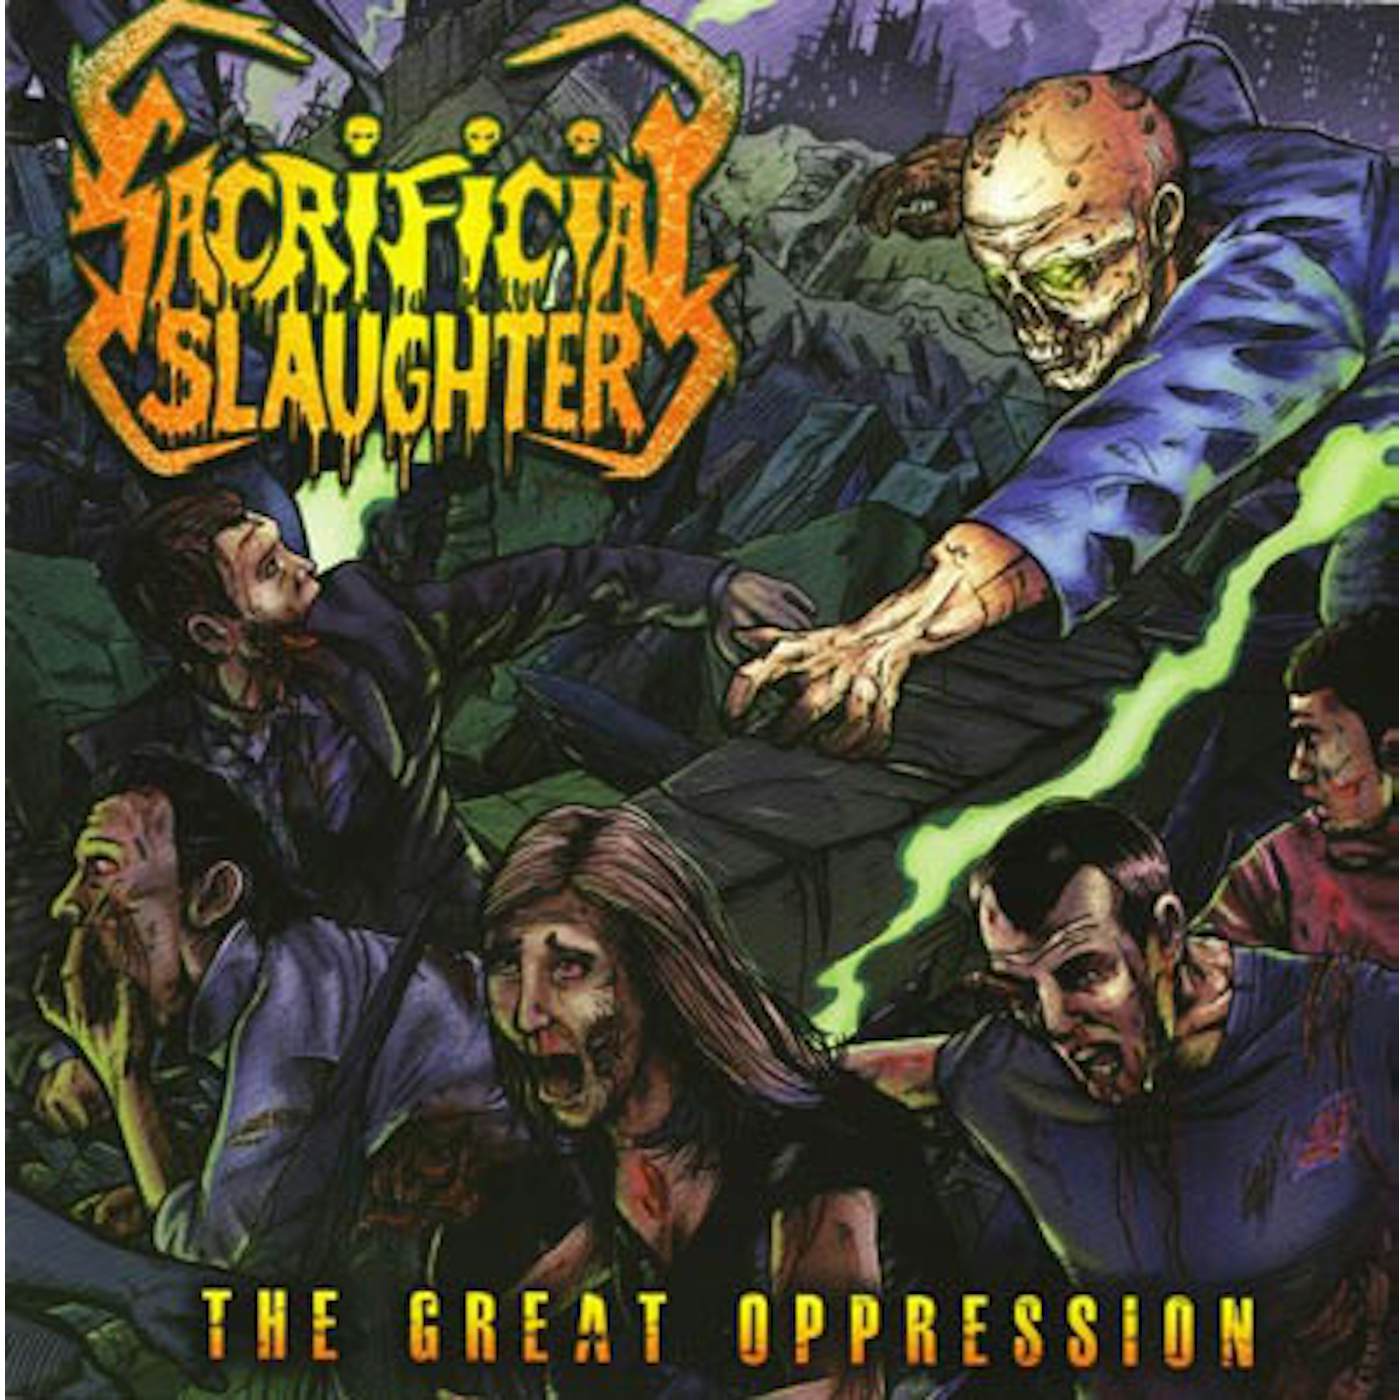 Sacrificial Slaughter GREAT OPPRESSION Vinyl Record